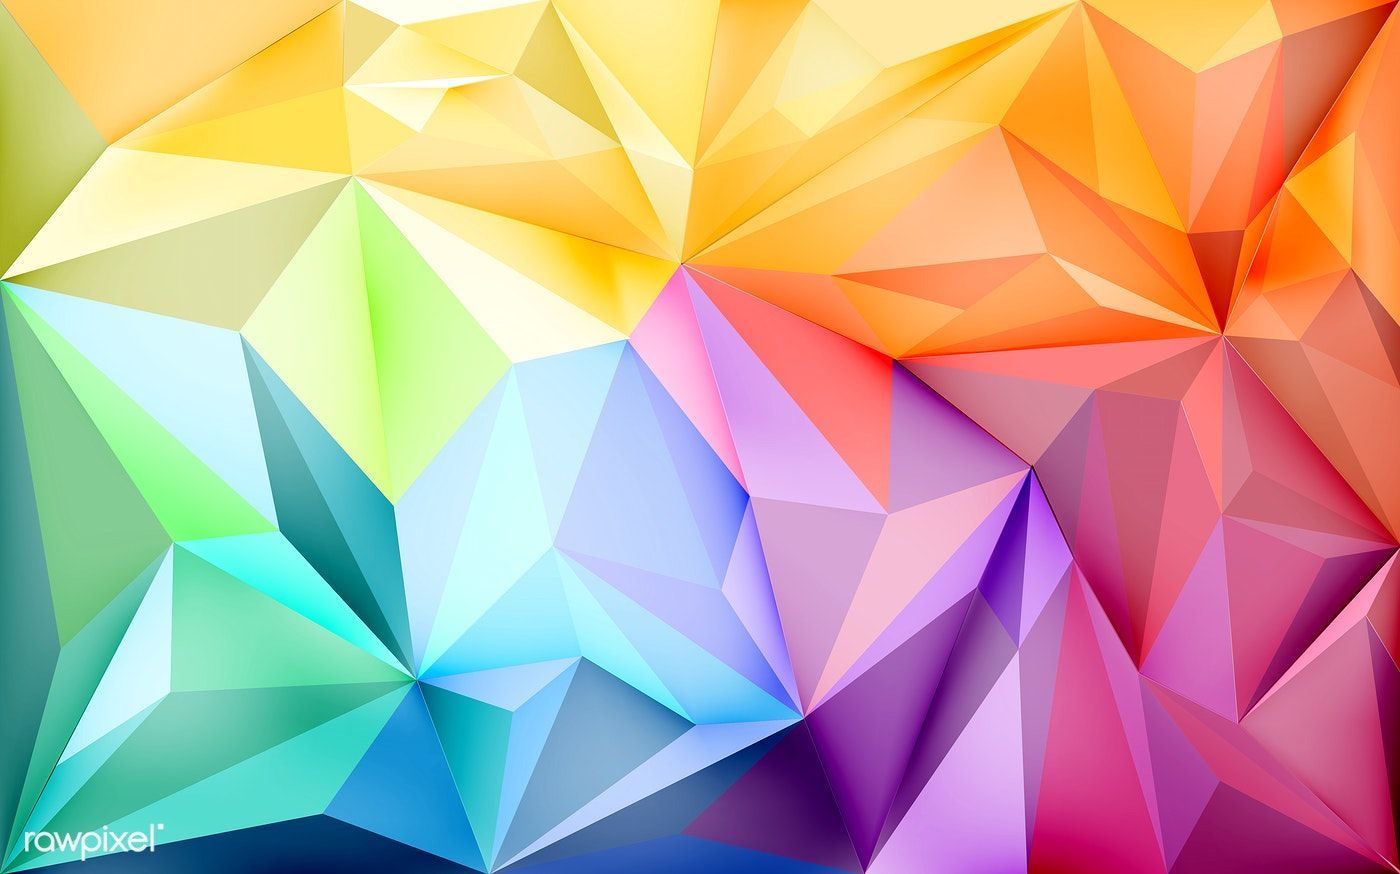 Background wallpaper with polygons in gradient colors. free image